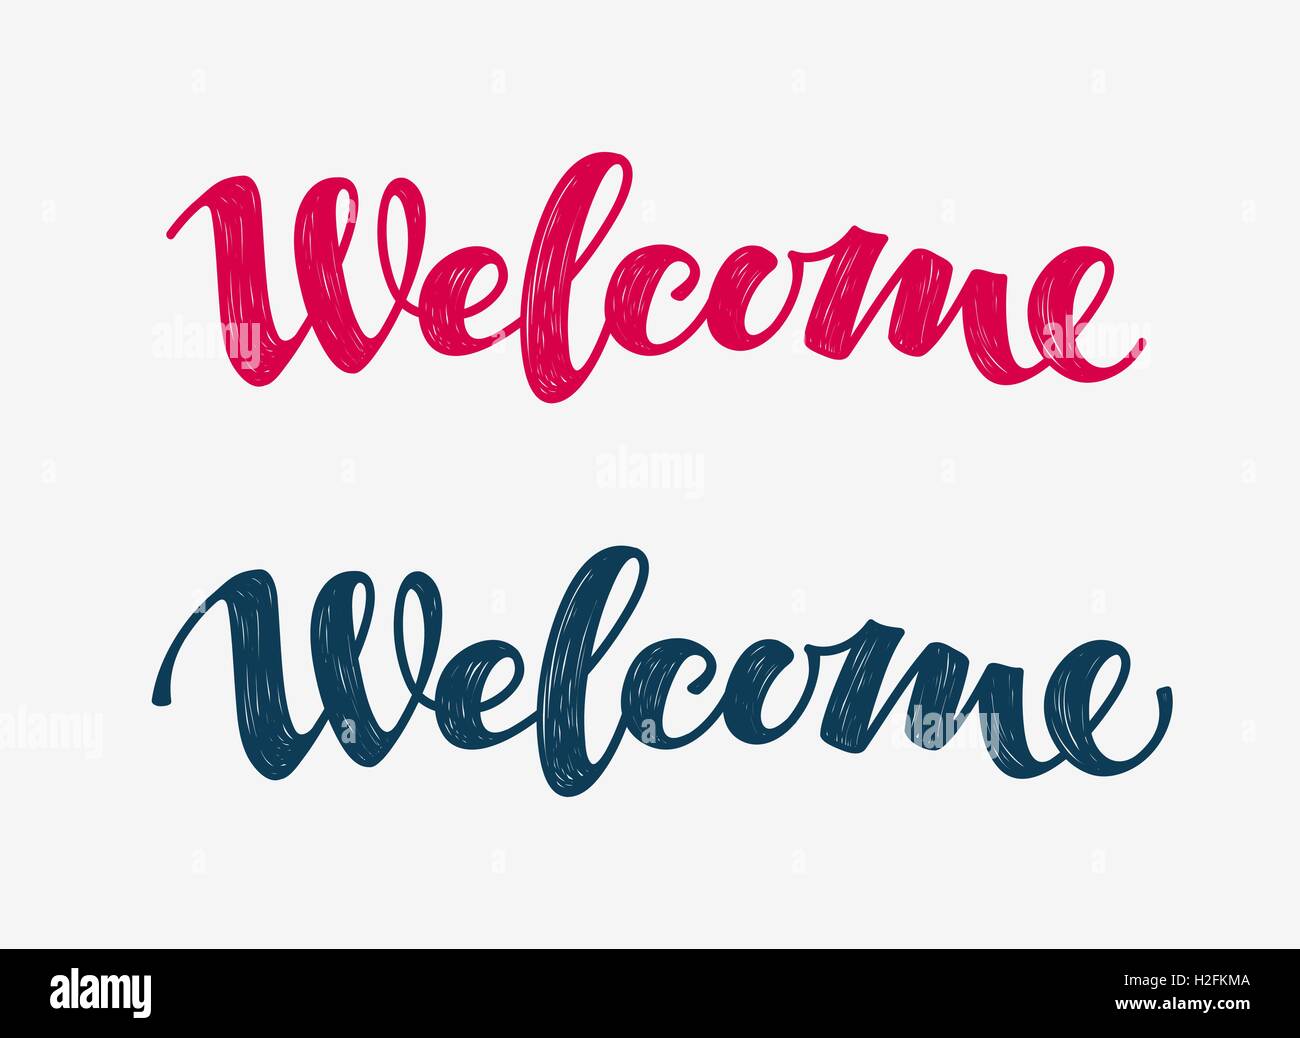 Welcome grunge doodle. Lettering calligraphic inscription. Vector illustration Stock Vector